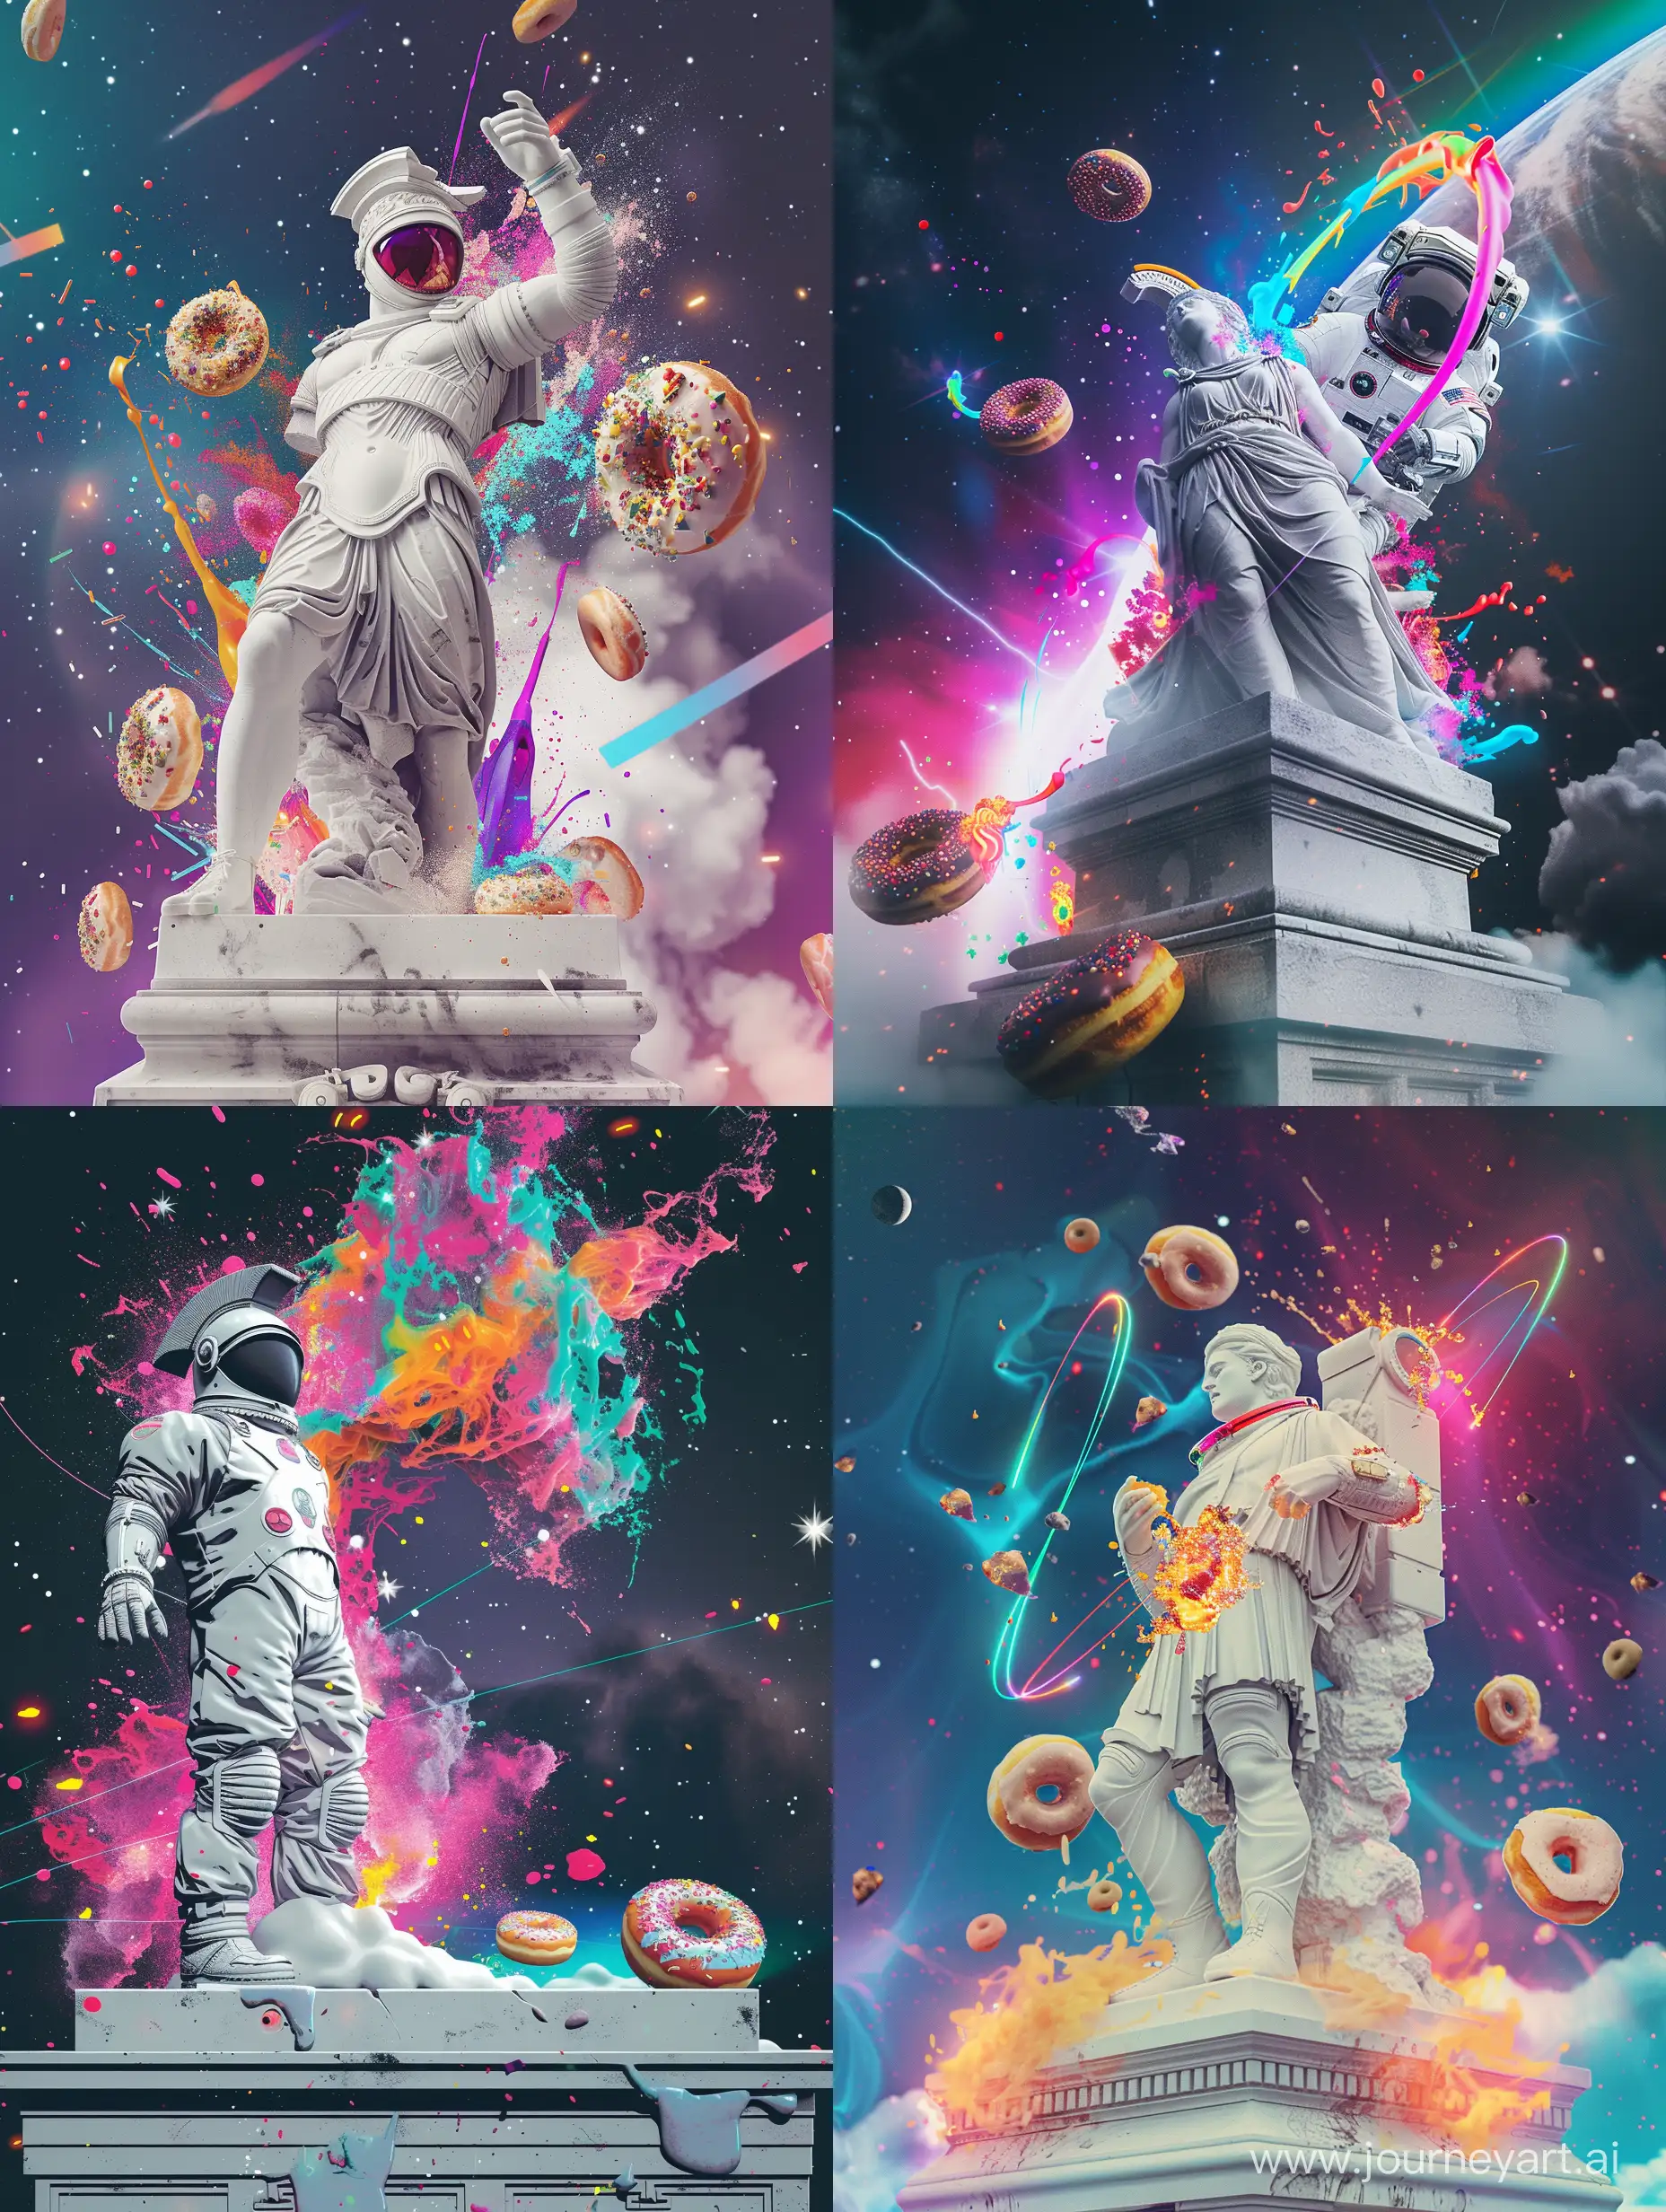 Cyberpunk synthwave Greek statue, exploding doughnuts food splatter and icing, spacesuit in white, against a night sky, with science fiction colorful light effects. Make it 2:3 aspect ratio for the statue and doughnuts, and 4:5 aspect ratio for the spacesuit in the night sky.